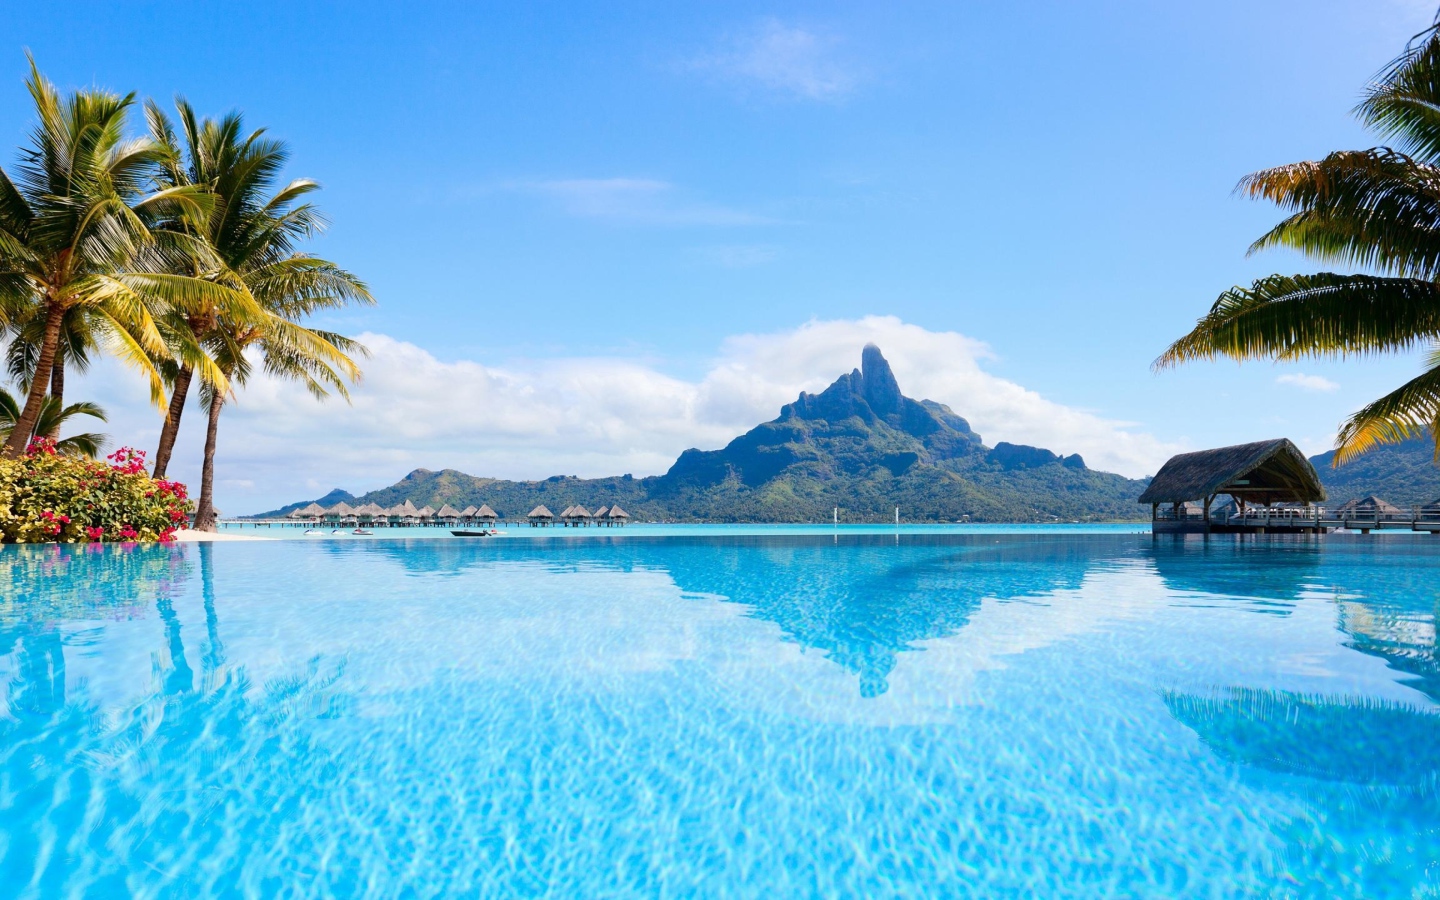 View of the blue water of Bora Bora island in the background of the mountain